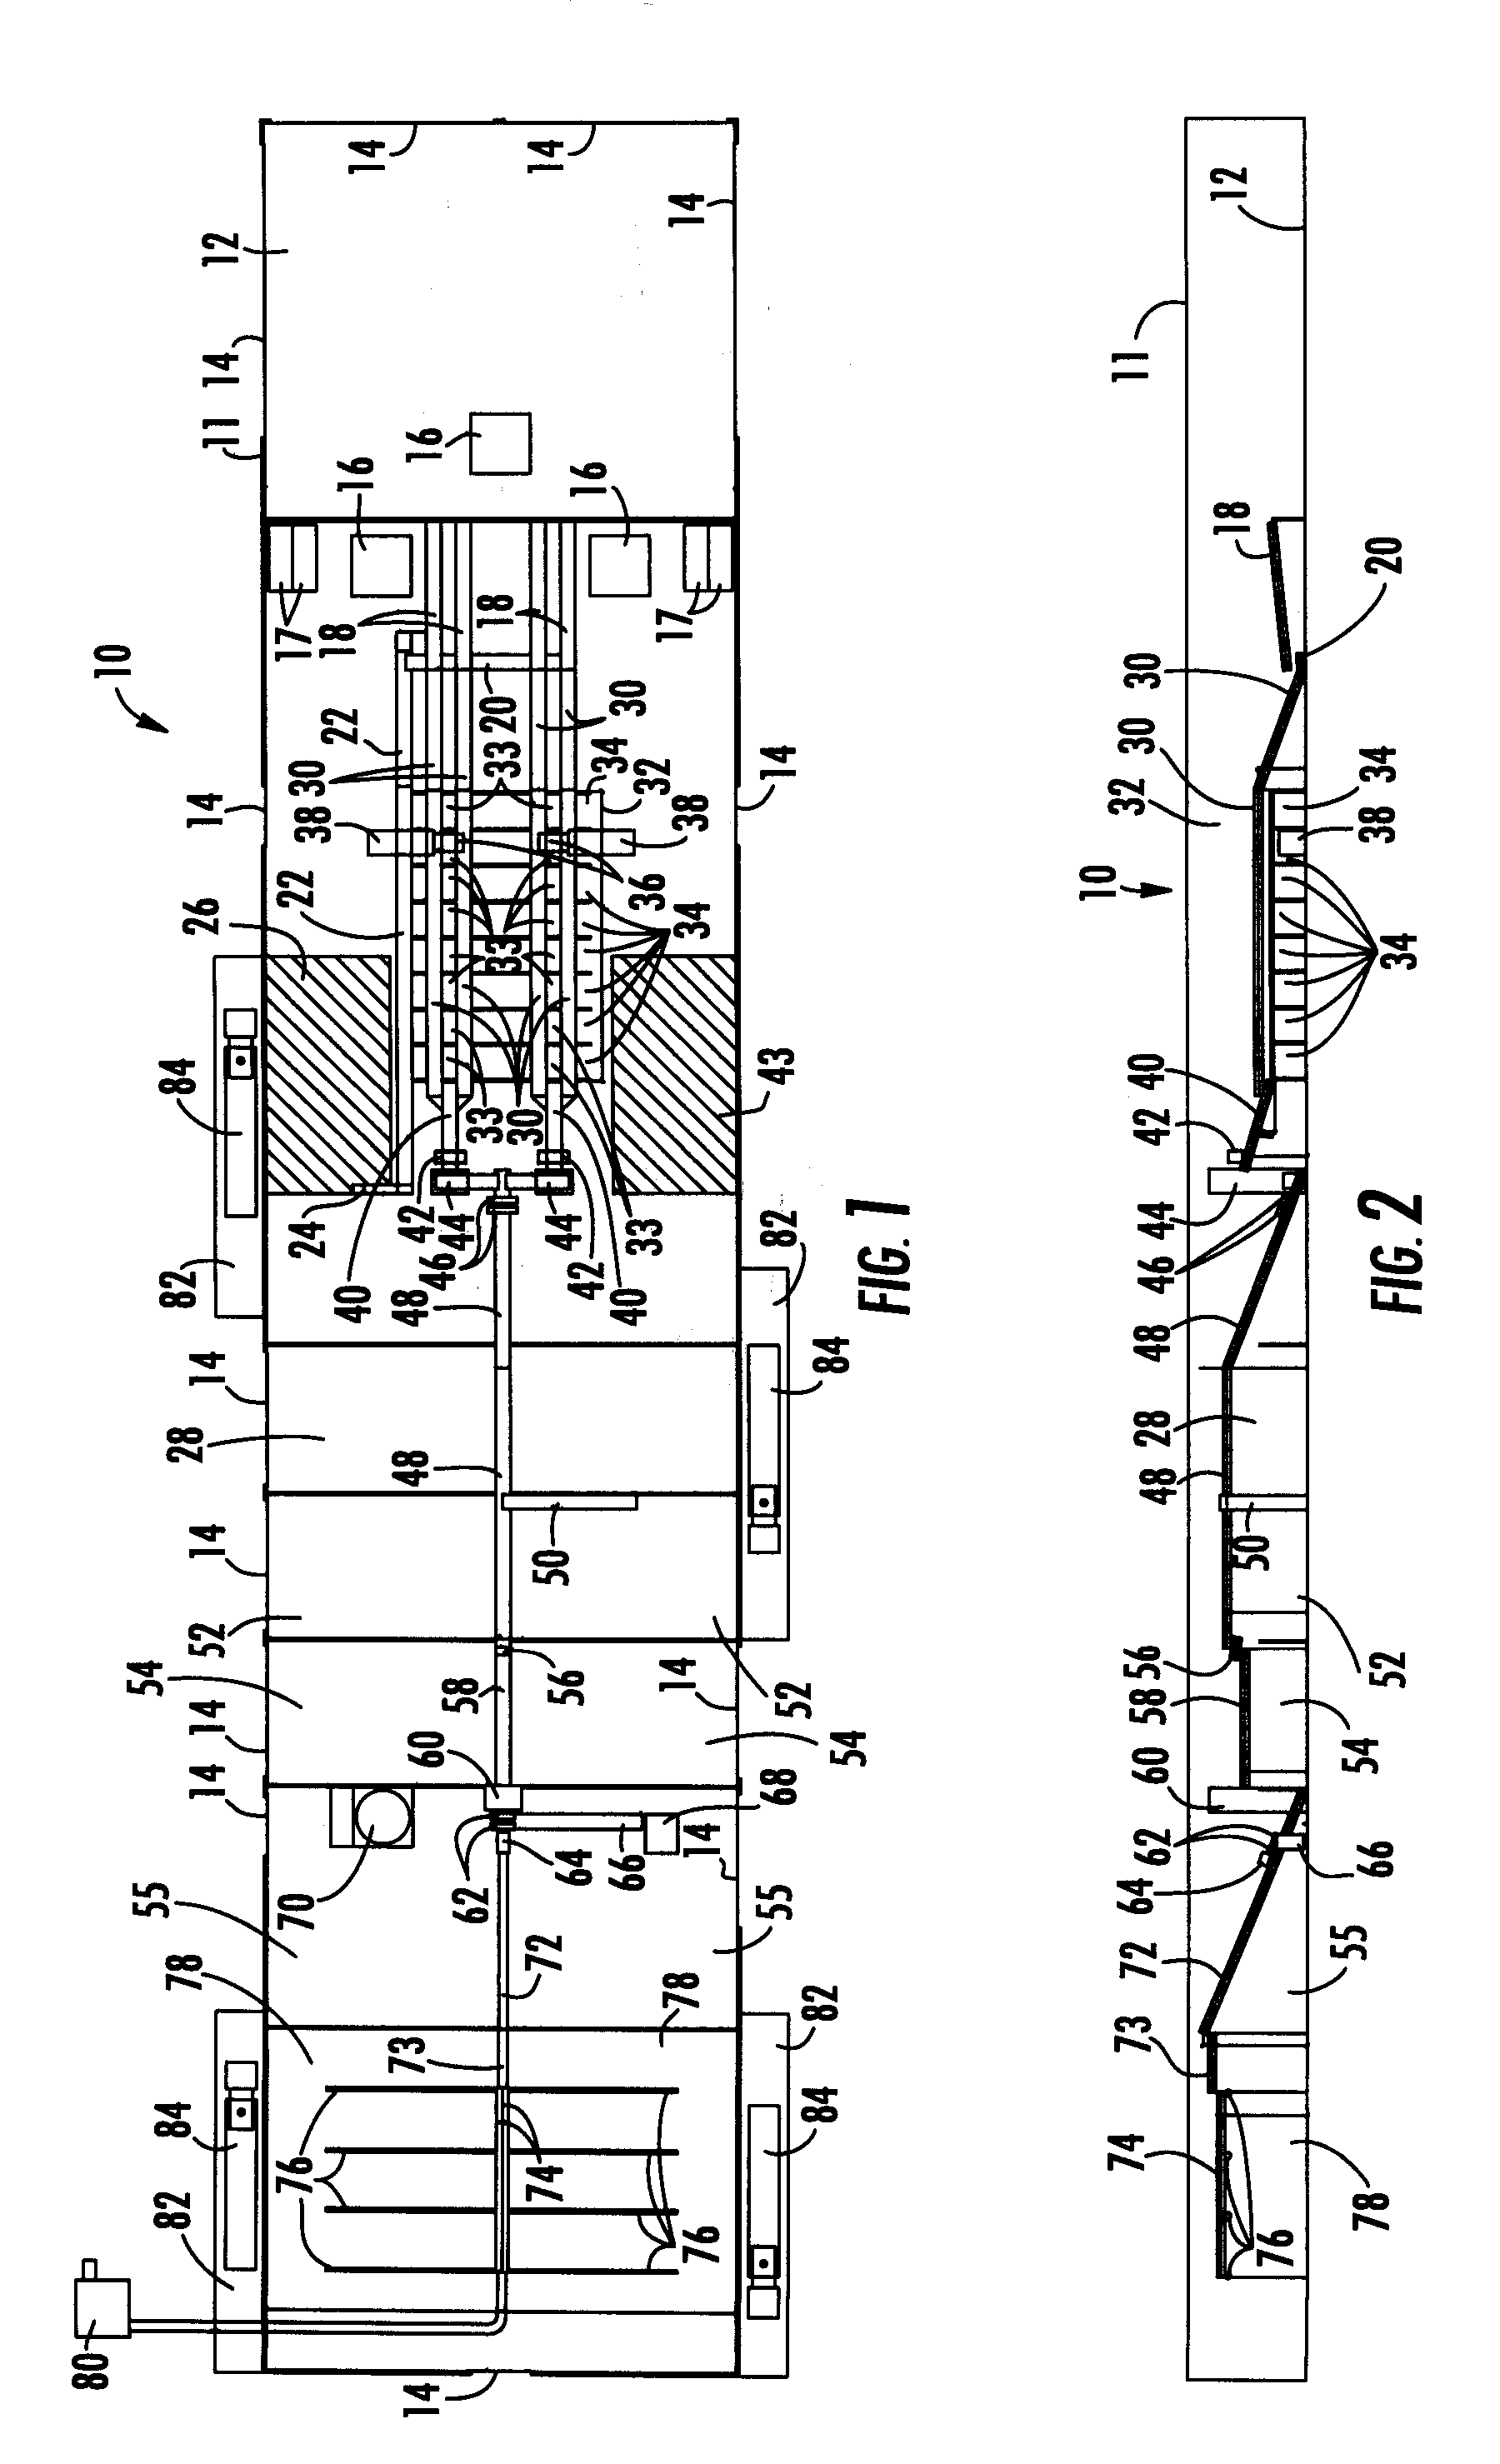 Construction and demolition waste recycling system and method